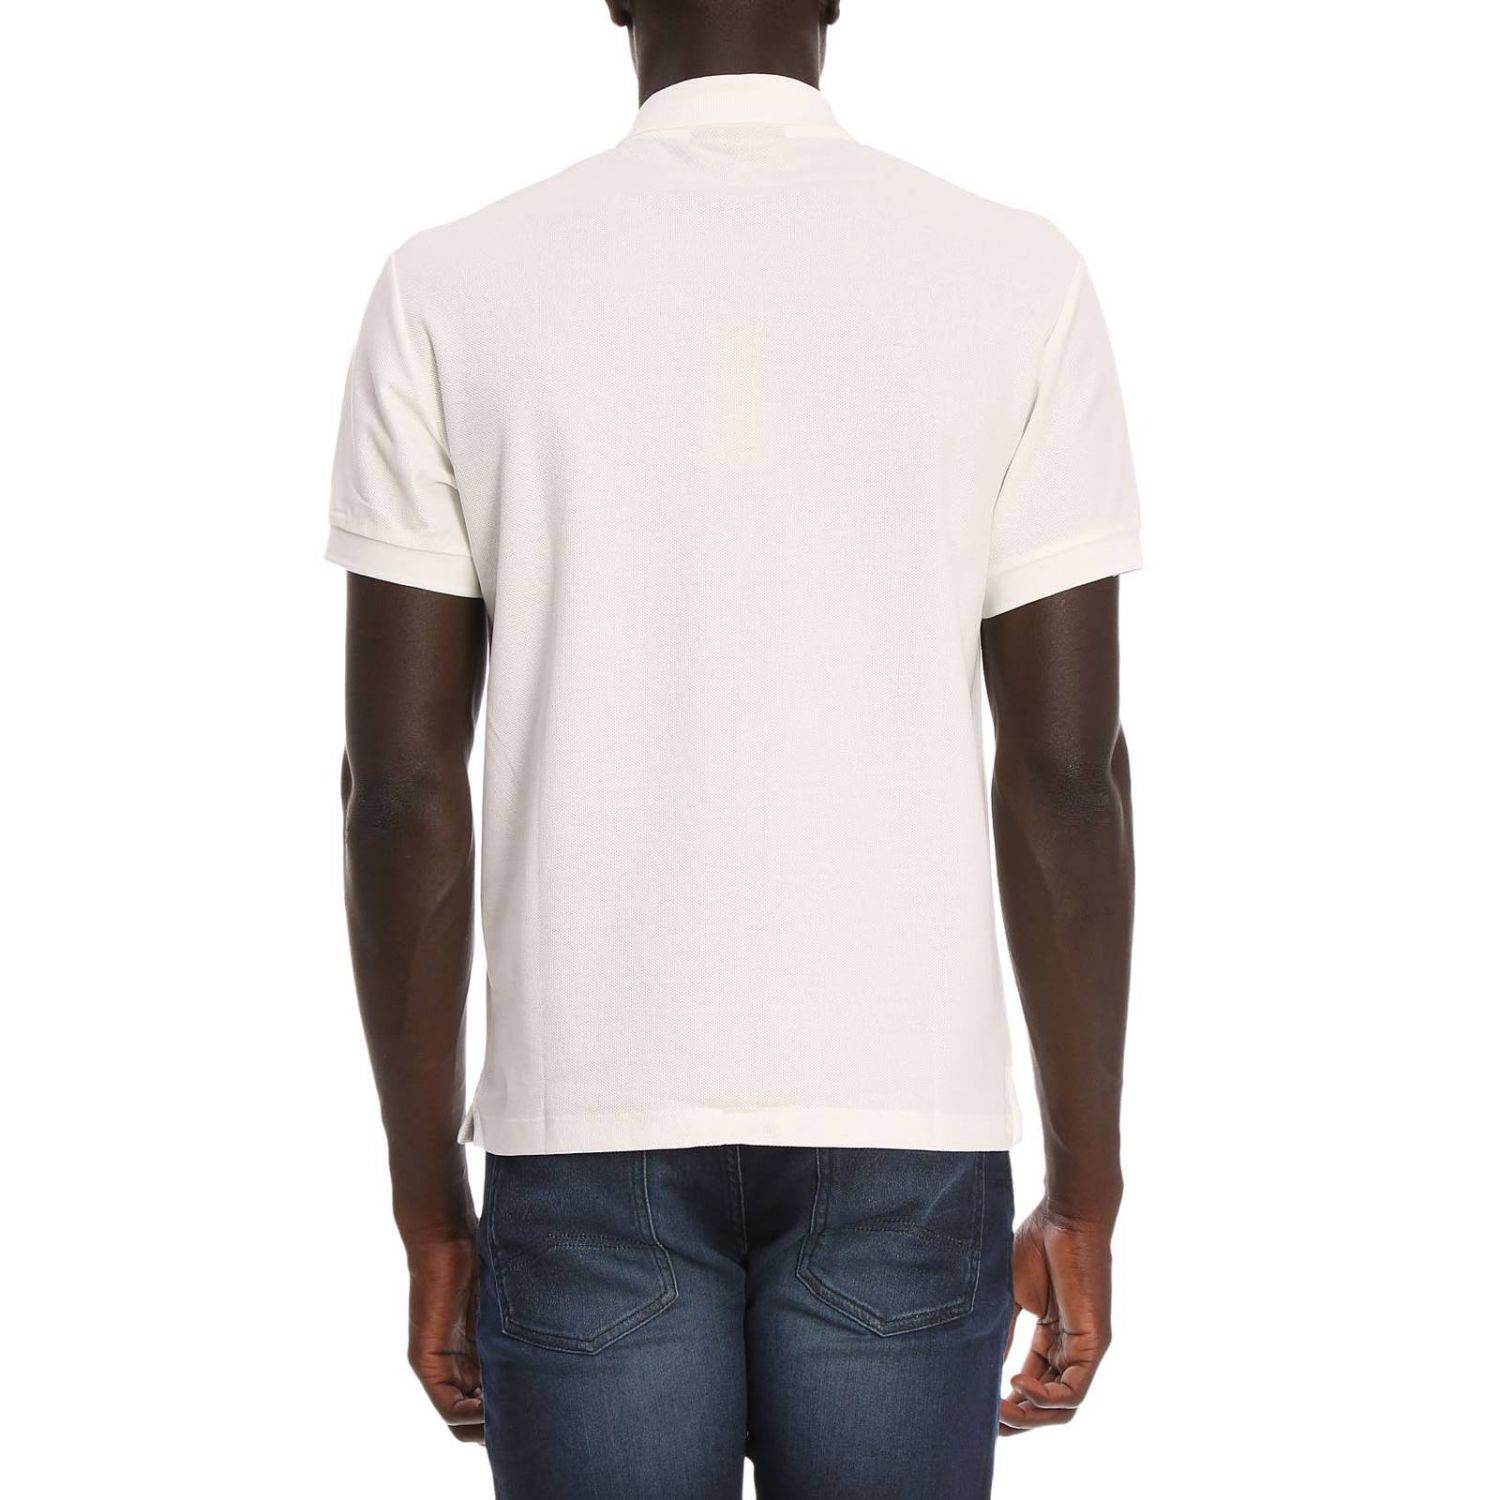 Burberry Outlet: T-shirt men - White | T-Shirt Burberry 8001218 GIGLIO.COM